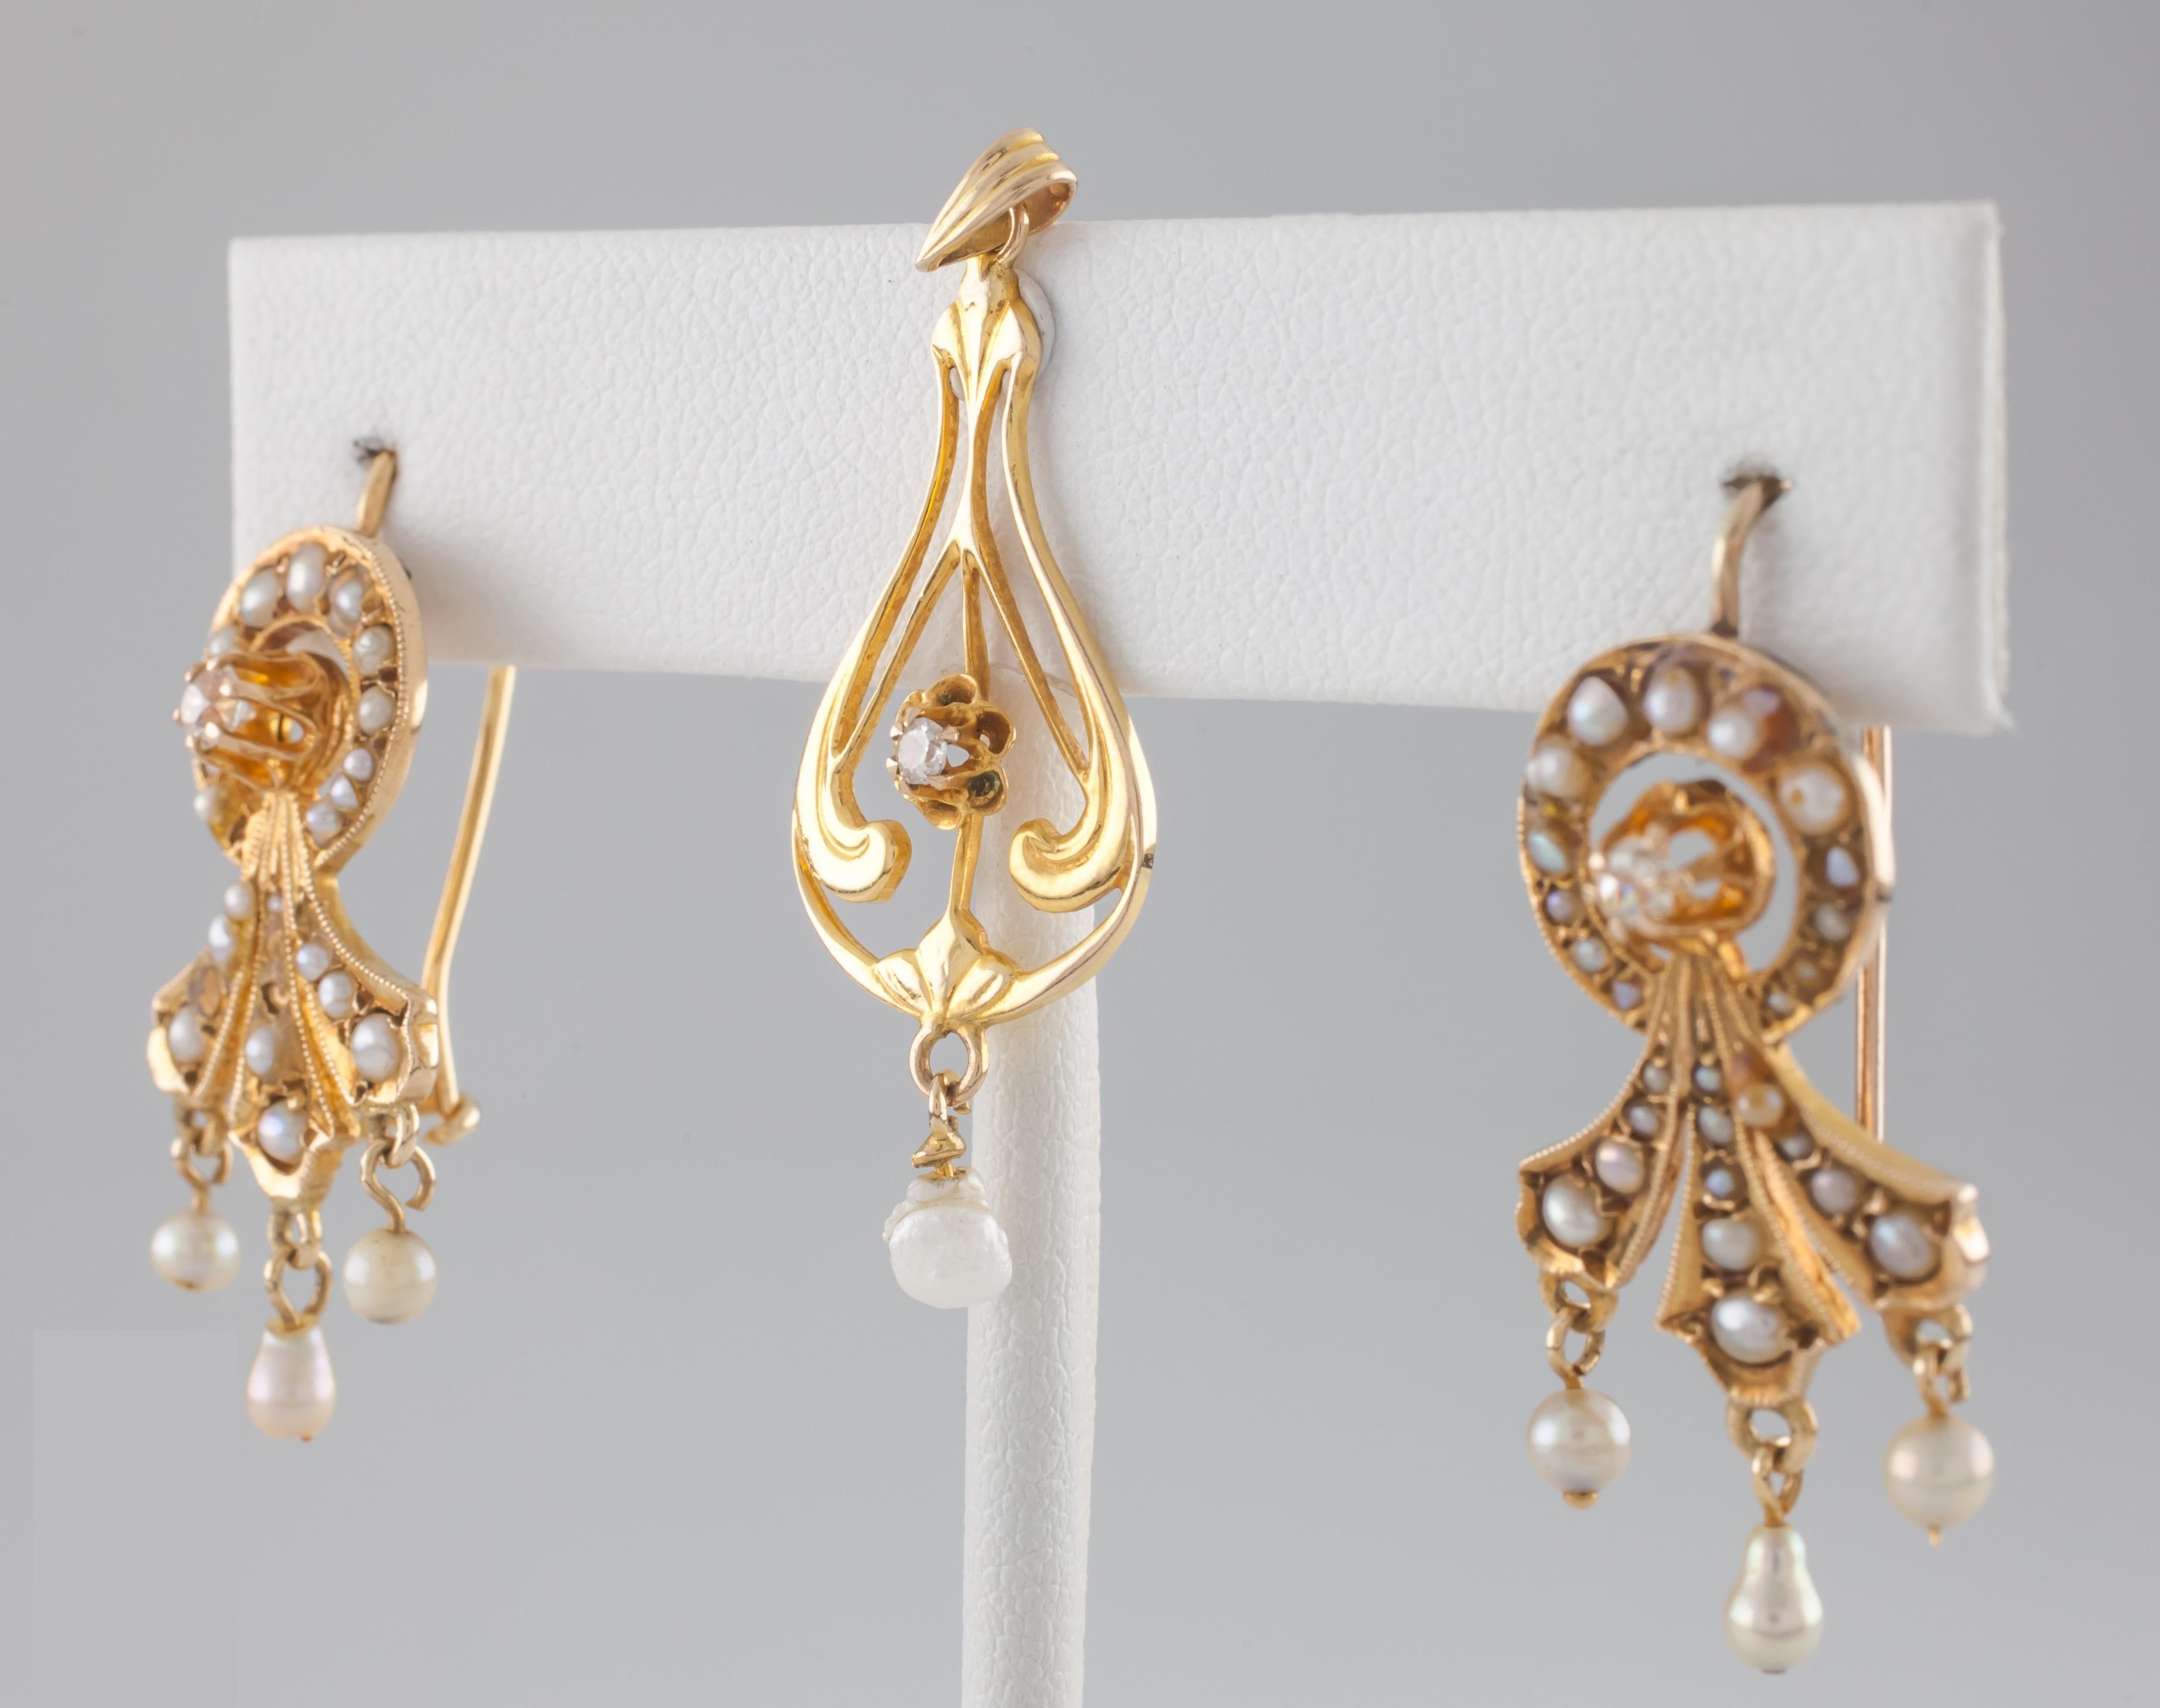 An Amazing set Of Pendant And Earrings Made From 14k Yellow Gold, seed pearls, and diamonds
Features Seed Pearls w/ Milgrain border
Single Diamond Solitaire at Center of Earring
Hook Backs w/ Latch
Pendant Size: 35 mm Long, 3 mm Wide at Narrowest,